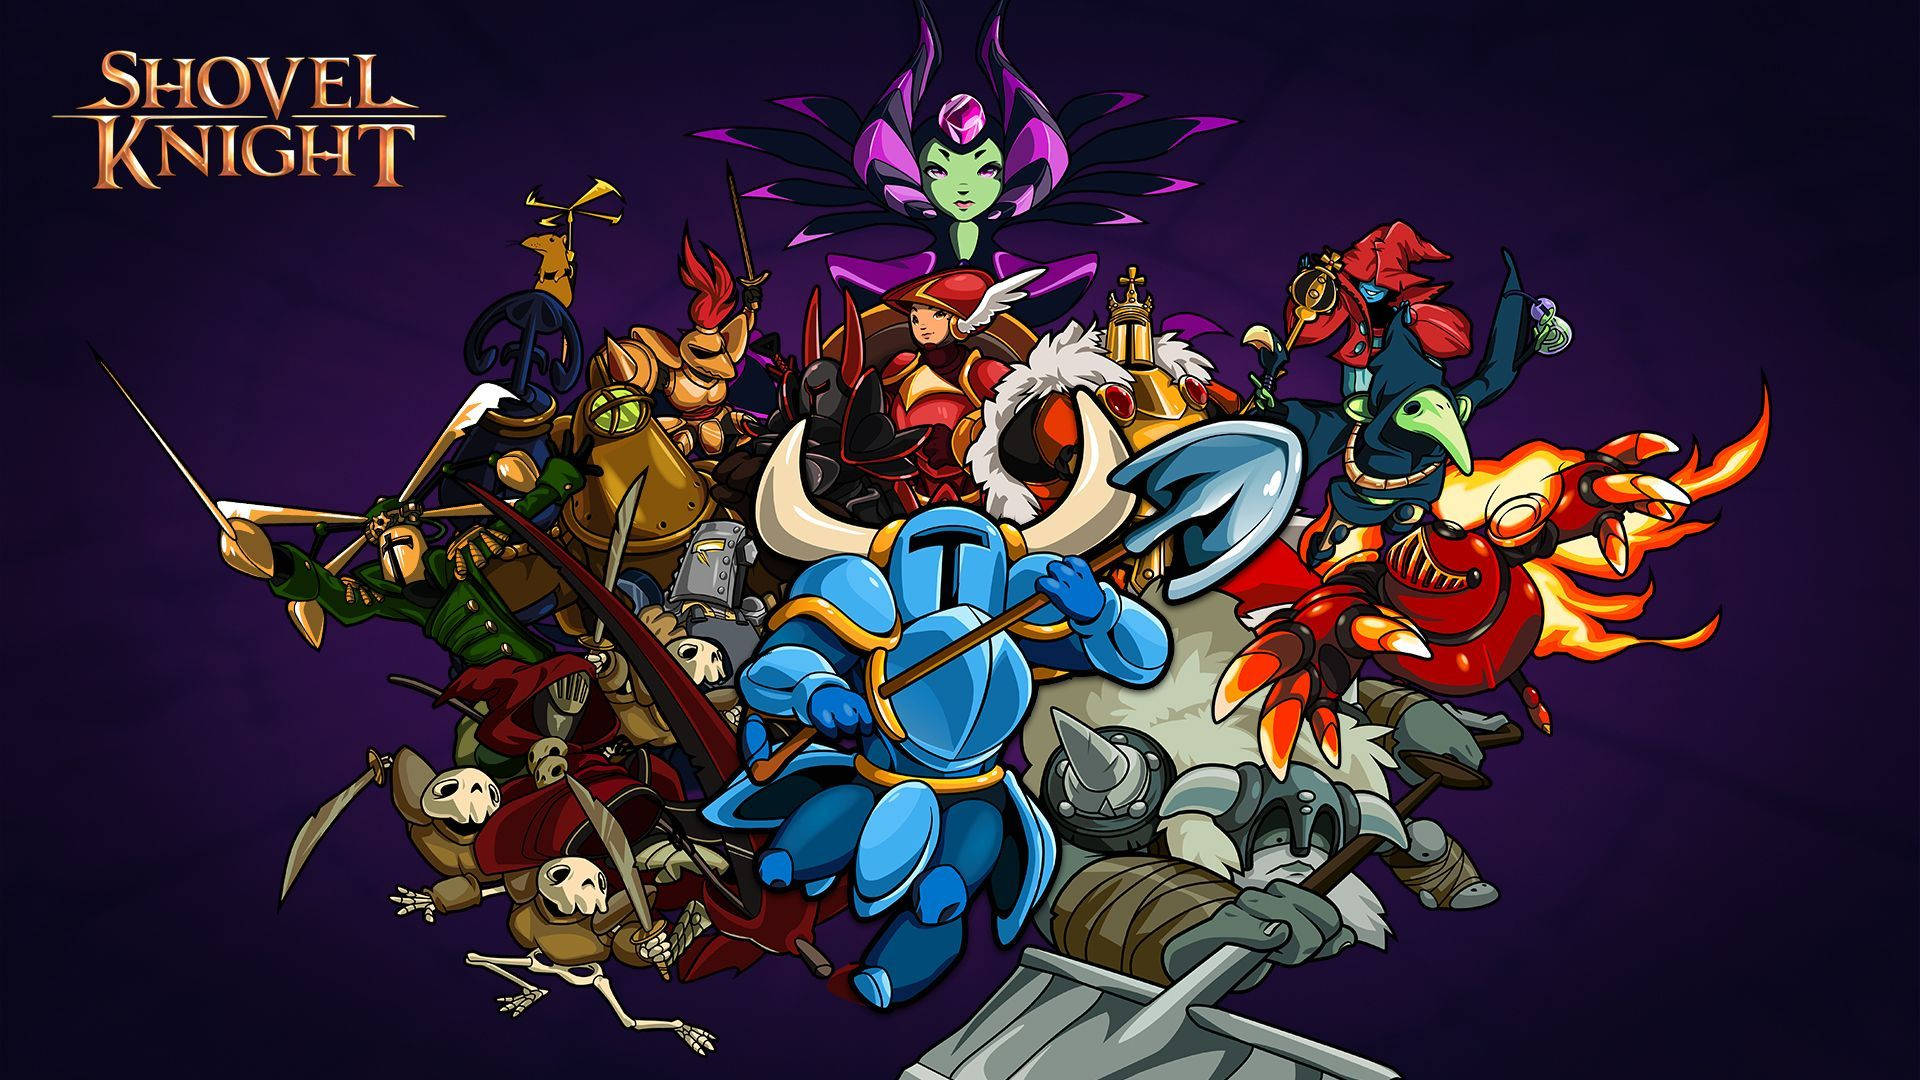 Exciting Characters from the Shovel Knight Game Wallpaper